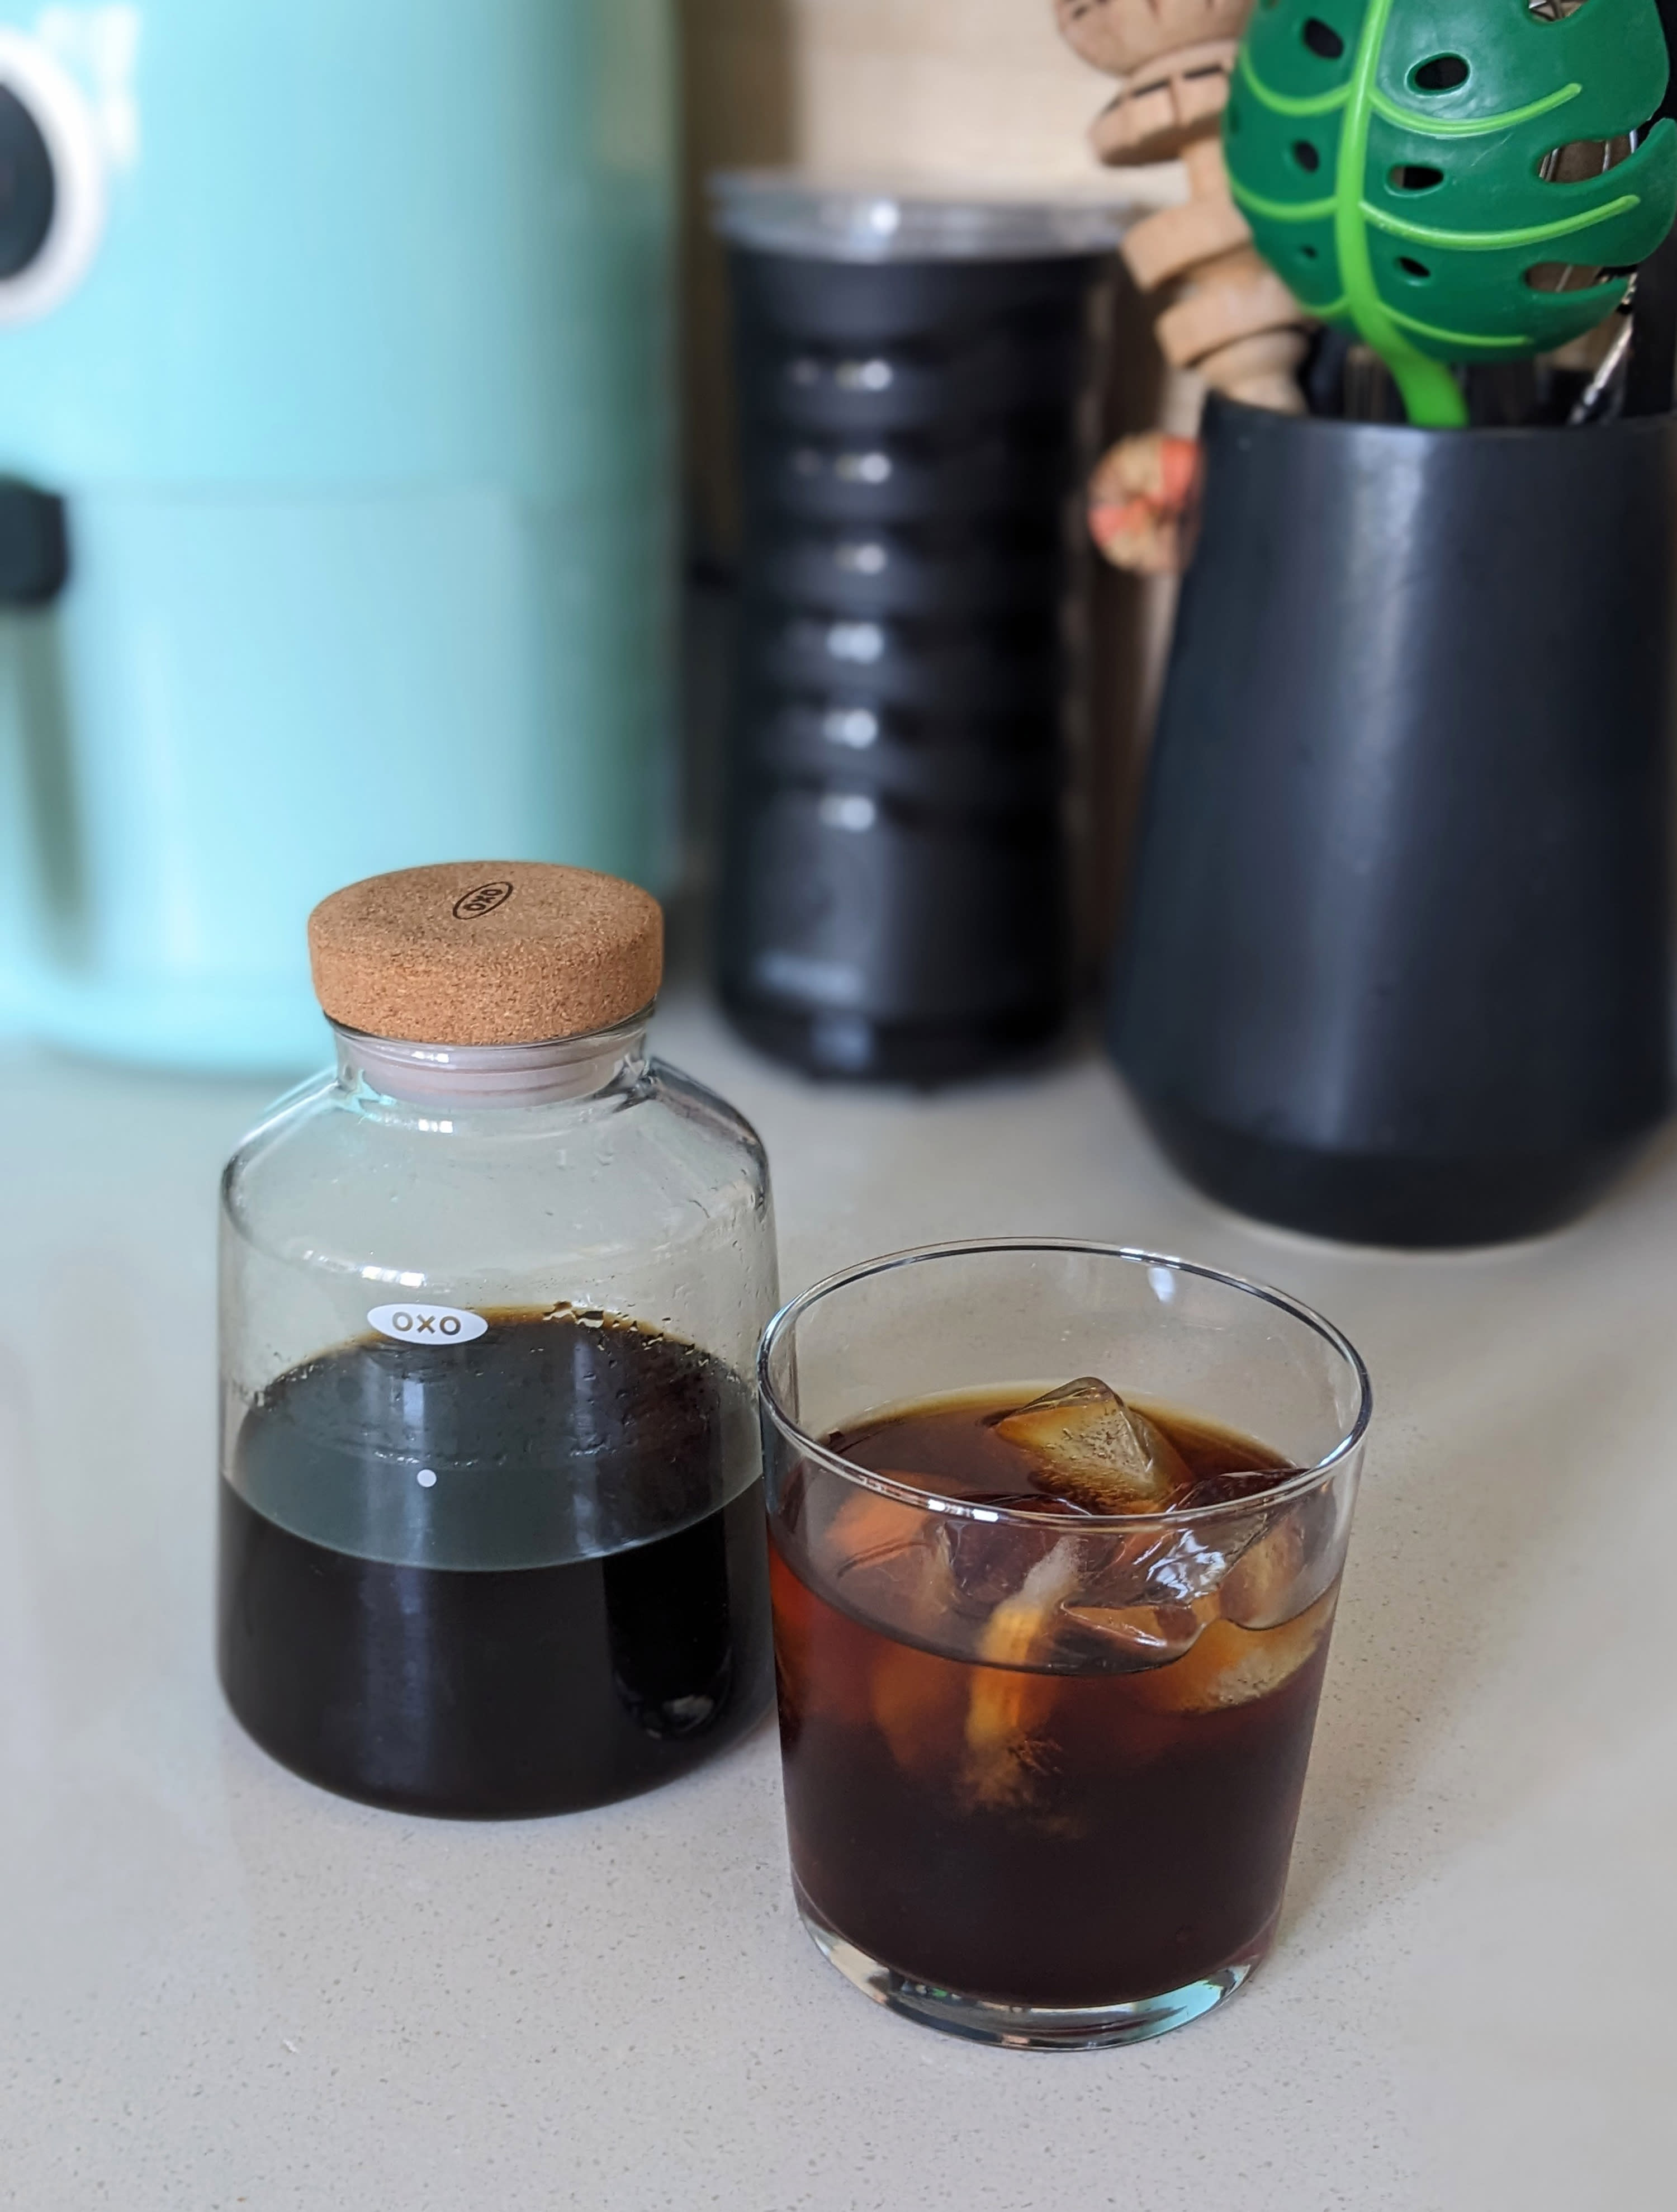 OXO Compact Cold Brew Coffee Maker Review - Tested, Photos